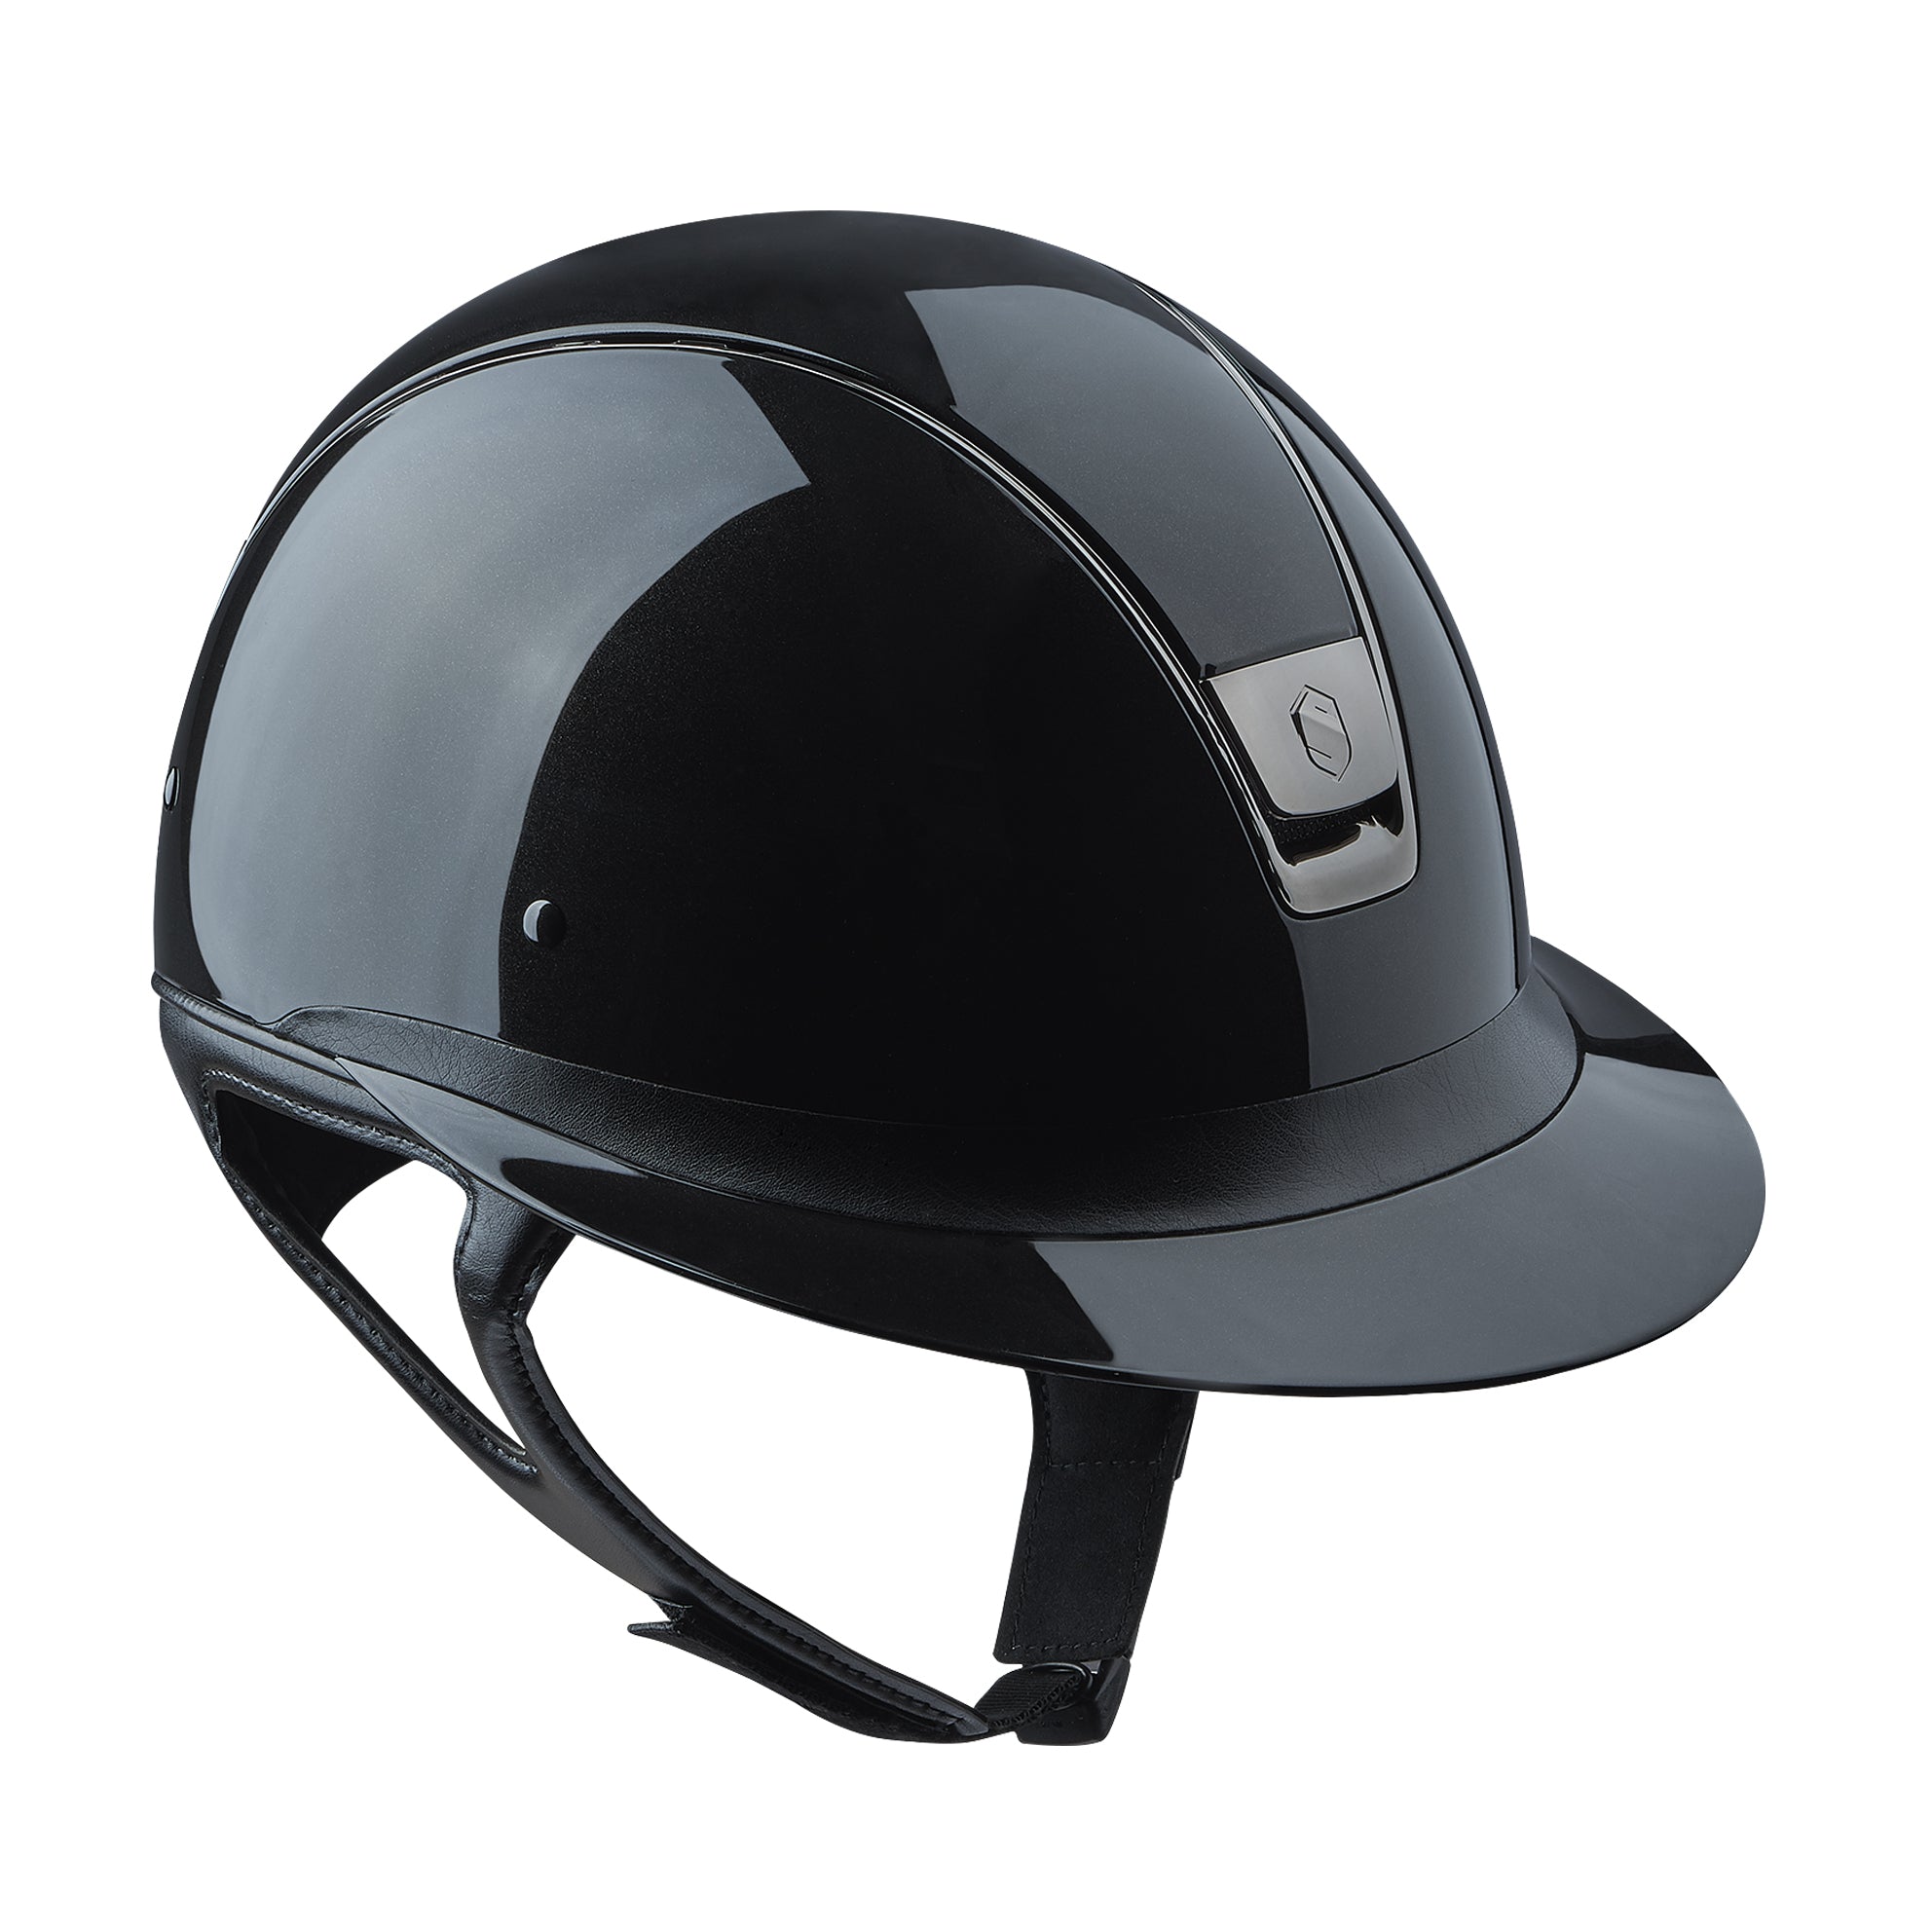 Samshield 1.0 Miss Shield Helmet - Glossy - Black - In stock and ready to ship